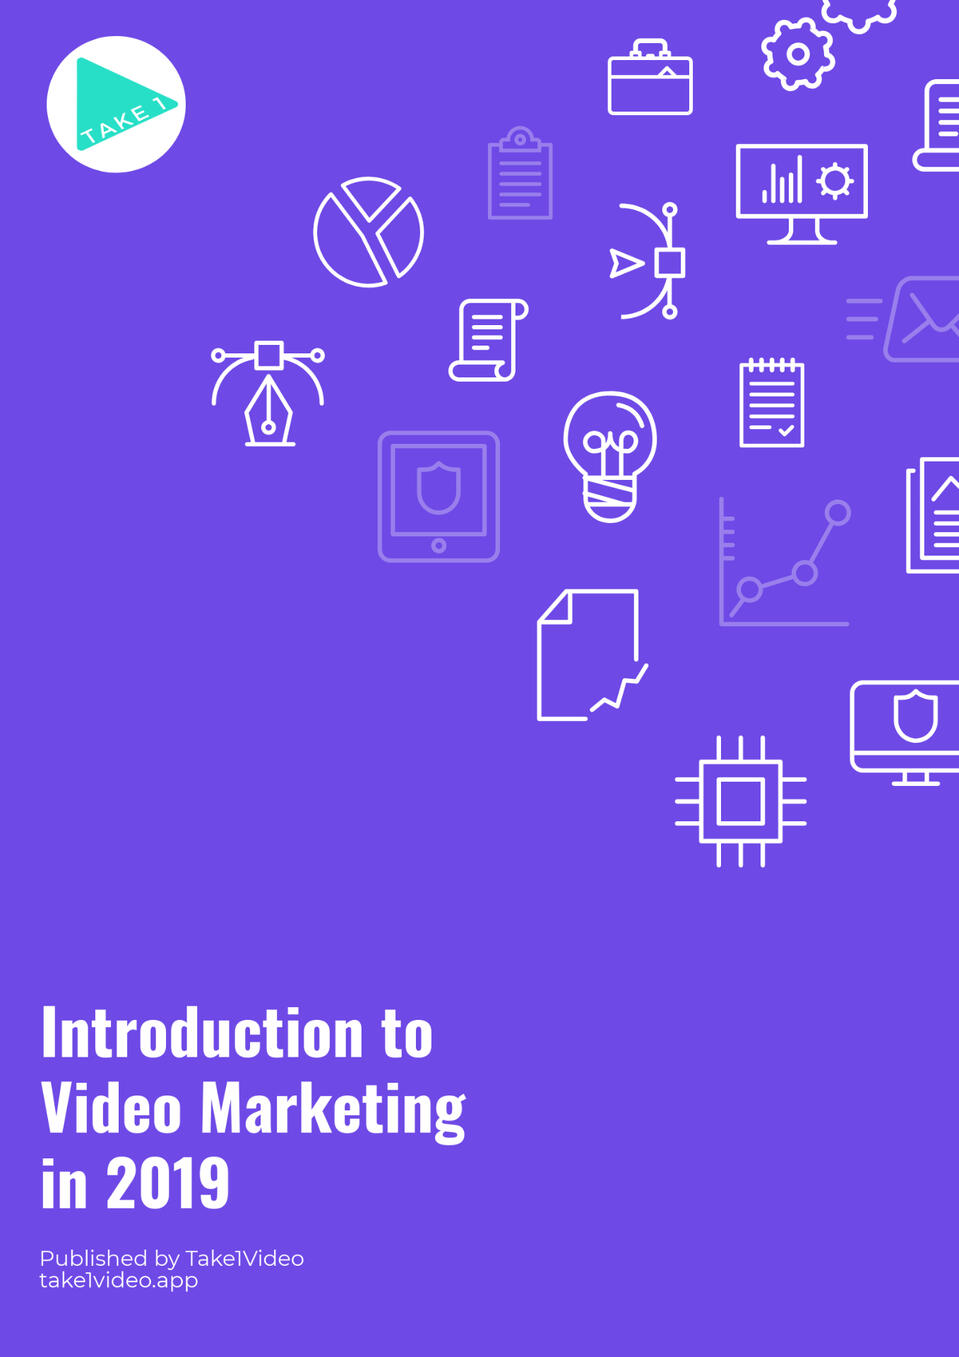 Introduction to Video Marketing in 2019 PDF file